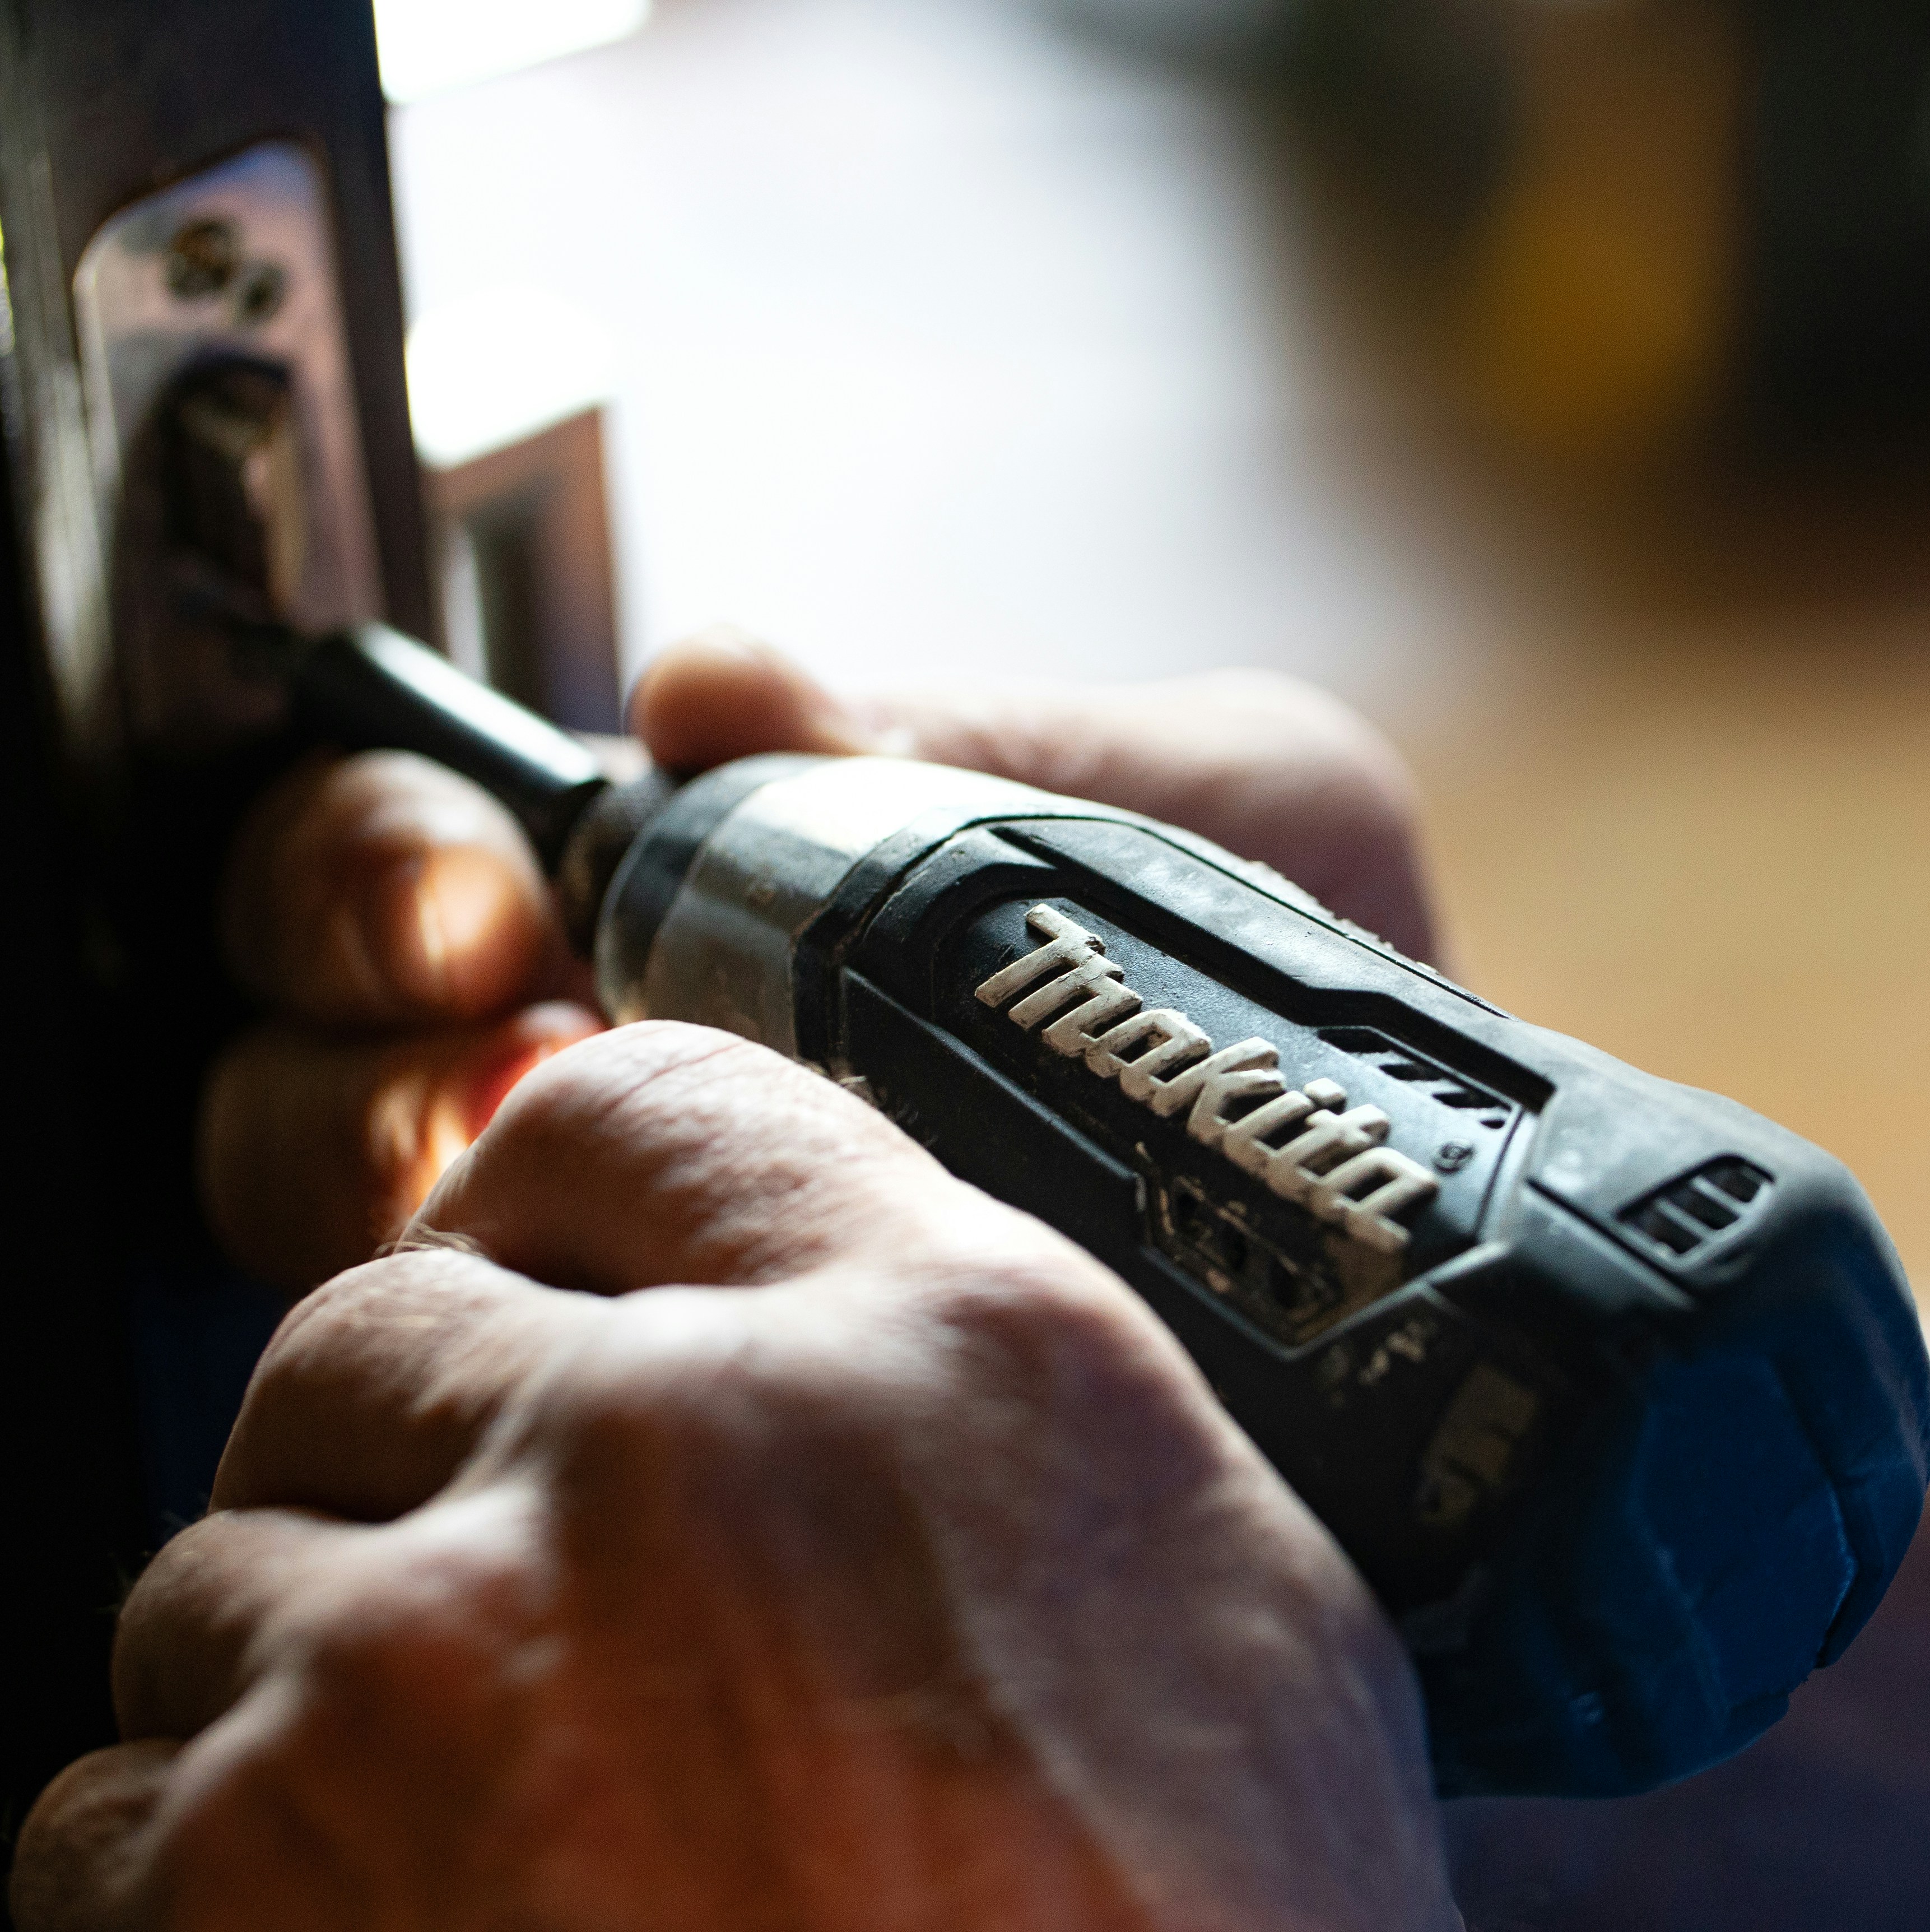 selective focus photography blue and black Makita power drill